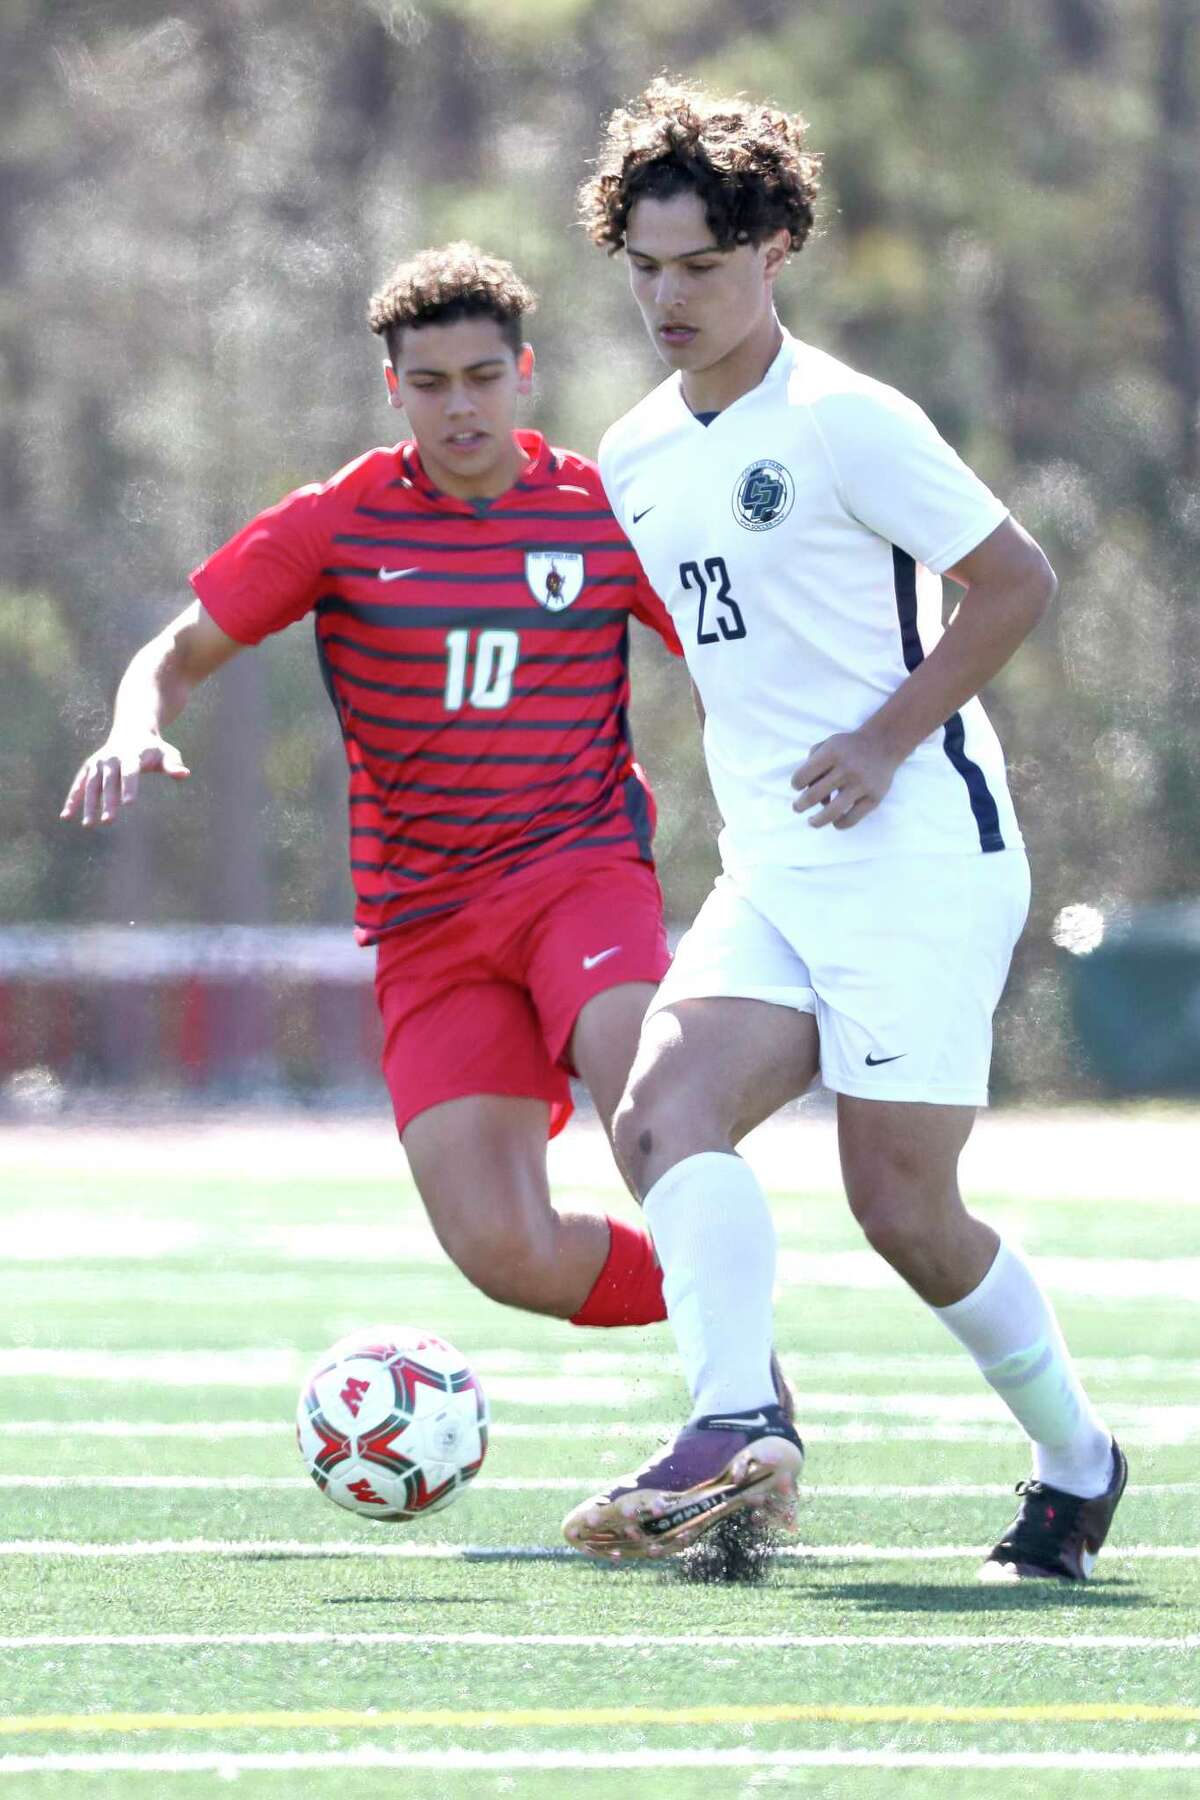 College Park's Julio De Los Reyes (23) makes a pass as The Woodlands' Henrique Caputo (10) defends during a District 13-6A high school soccer match at The Woodlands High School, Saturday, Feb. 4, 2023, in The Woodlands.